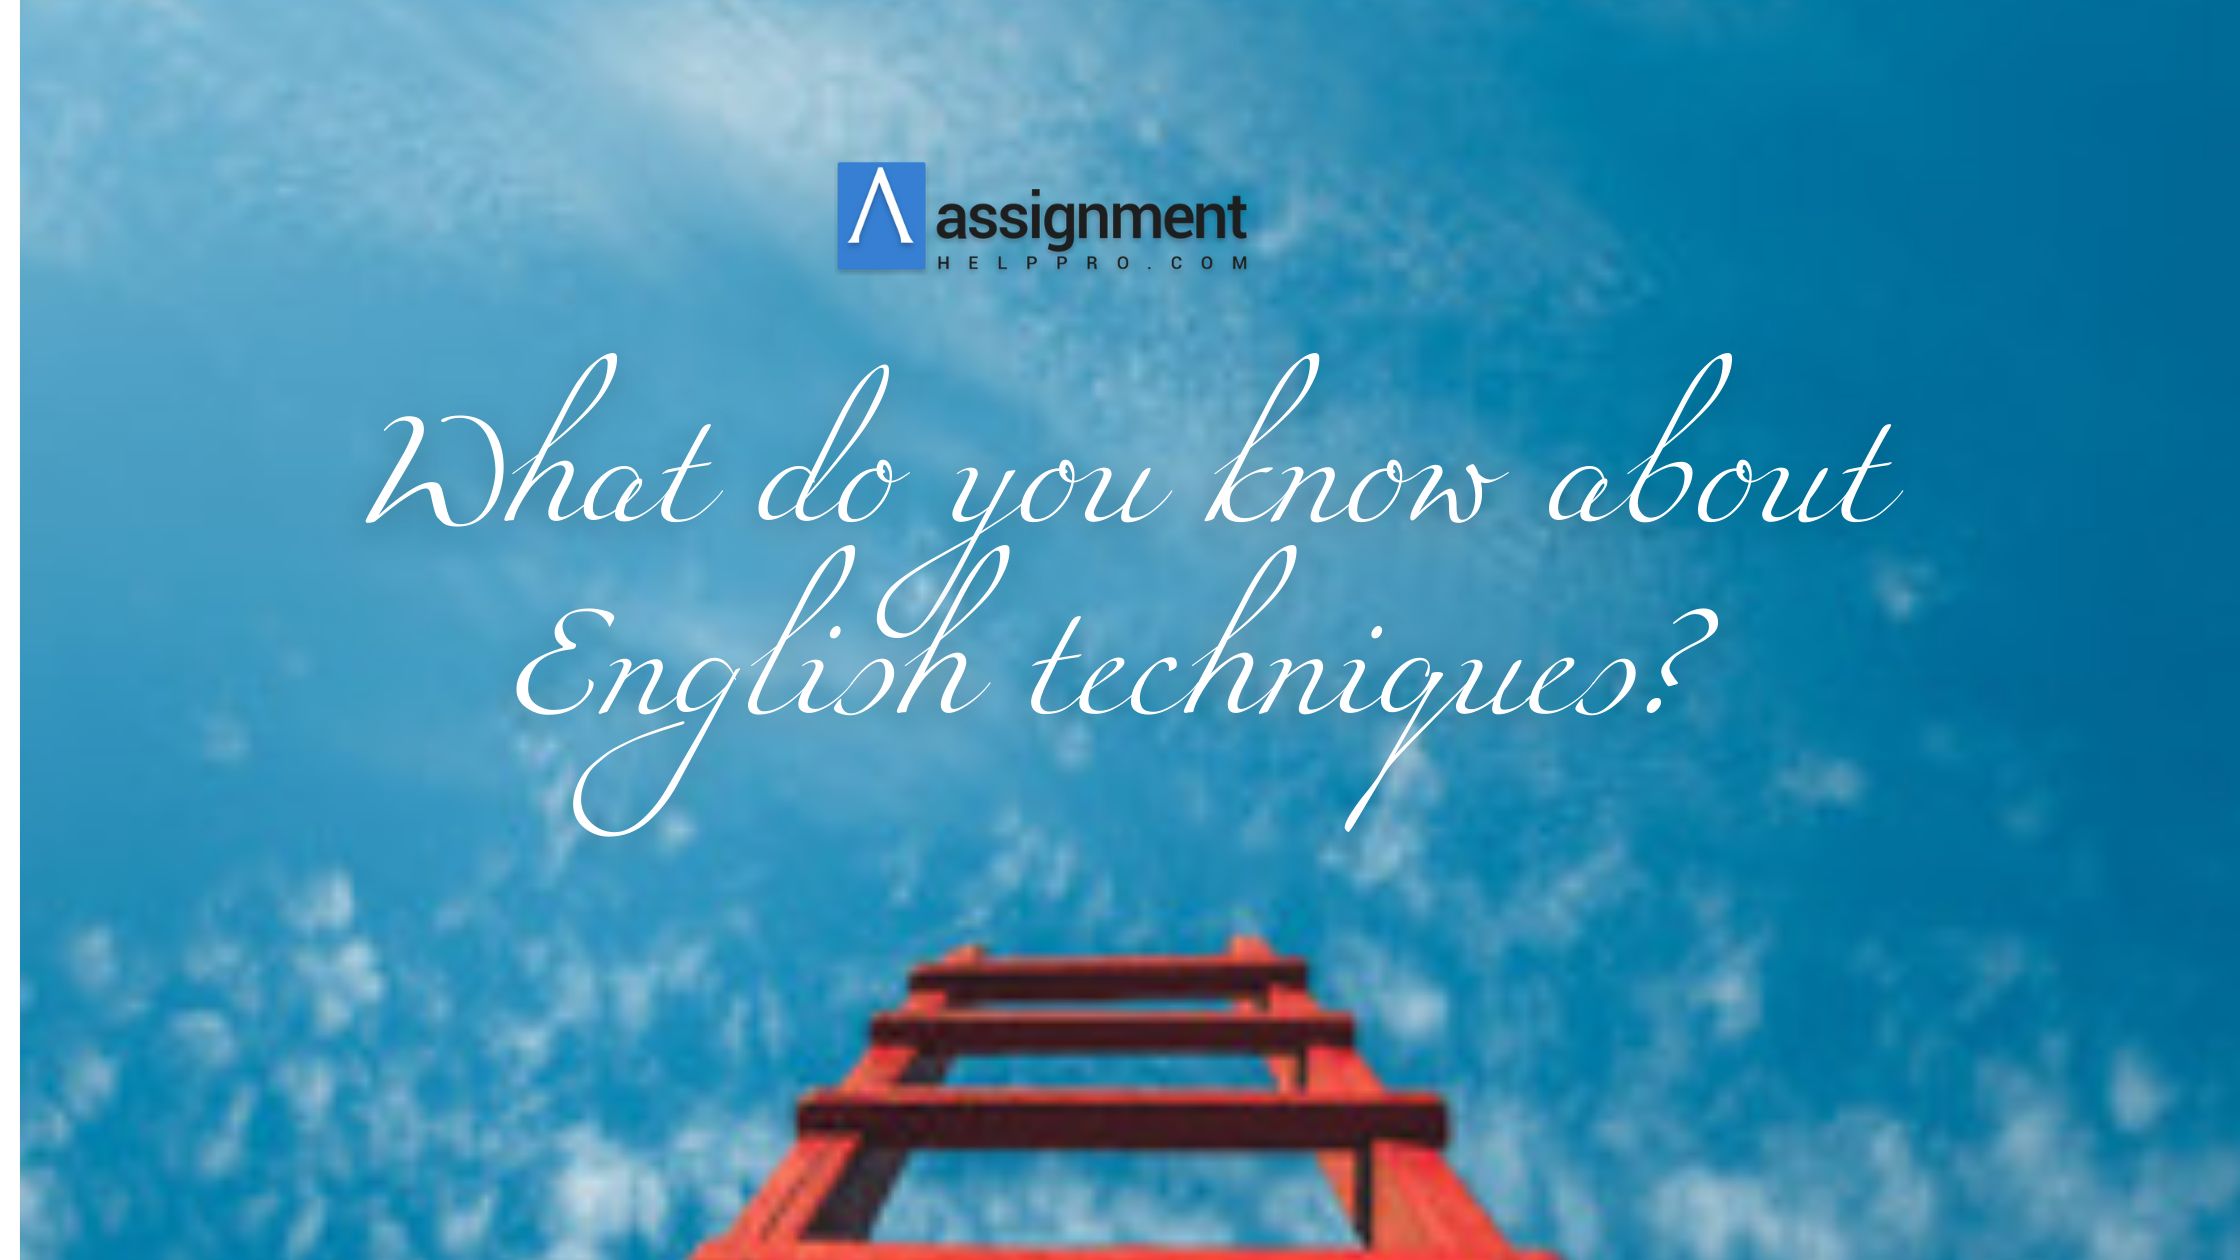 What are you know about English techniques? - AtoAllinks